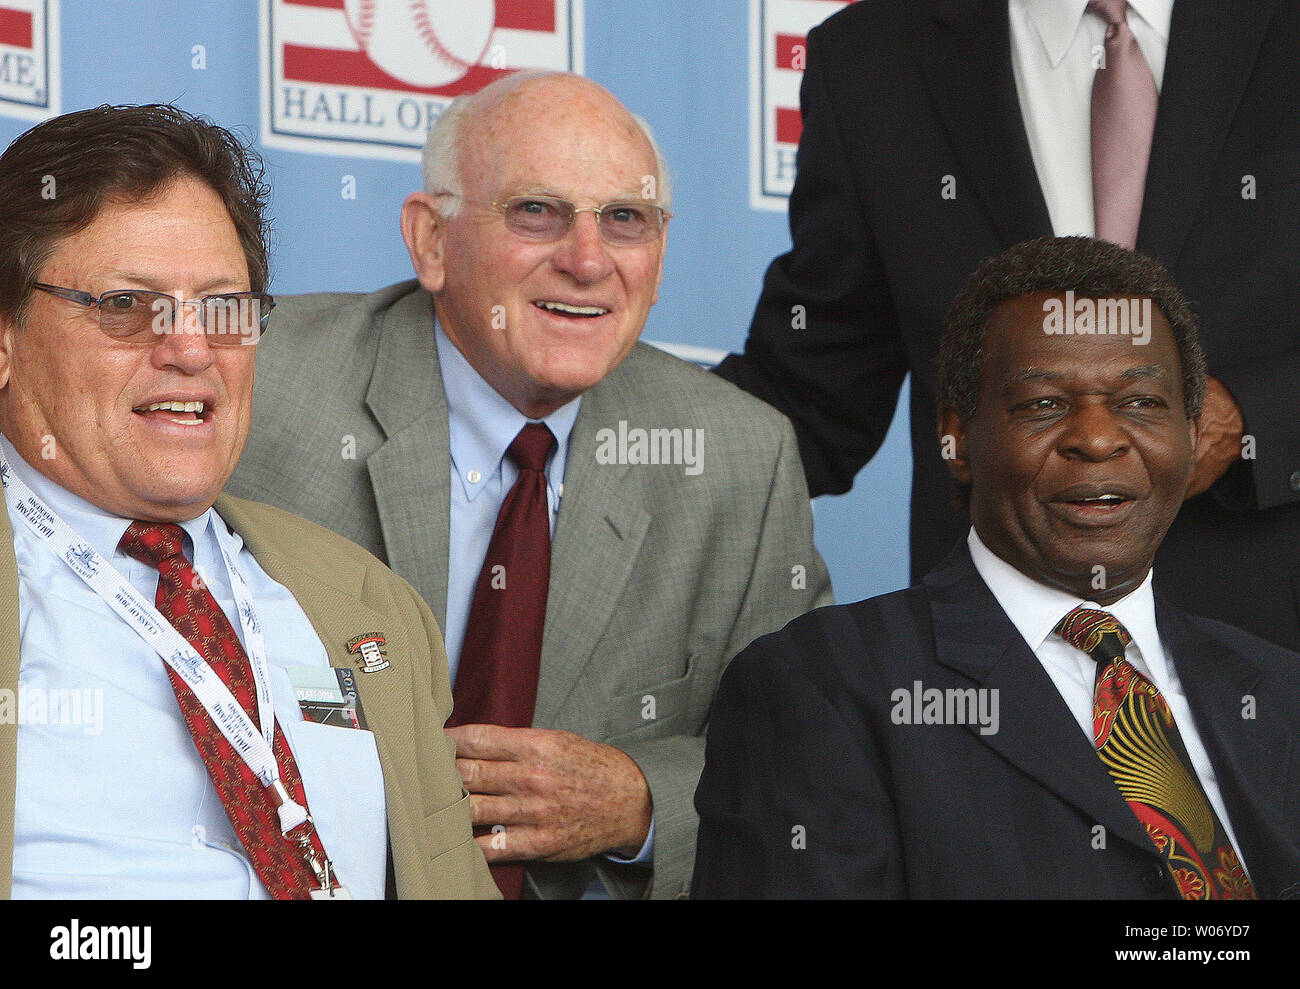 National Baseball Hall of Fame member Harmon Killebrew (C) shown with fellow members Carlton Fisk (L) and Lou Brock at induction ceremonies in July 2010 in Cooperstown,NY, has announced  he will no longer fight esophageal cancer and is settling in for the final days of his life on May 13, 2011. Killebrew, who played for the Minnesota Twins released a statement saying he has 'exhausted all optionsÓ for treatment and the cancer is incurable. Killebrew says he will enter hospice care in Arizona. Killebrew was inducted into the Hall of Fame in 1984.  UPI/Bill Greenblatt/FILES Stock Photo